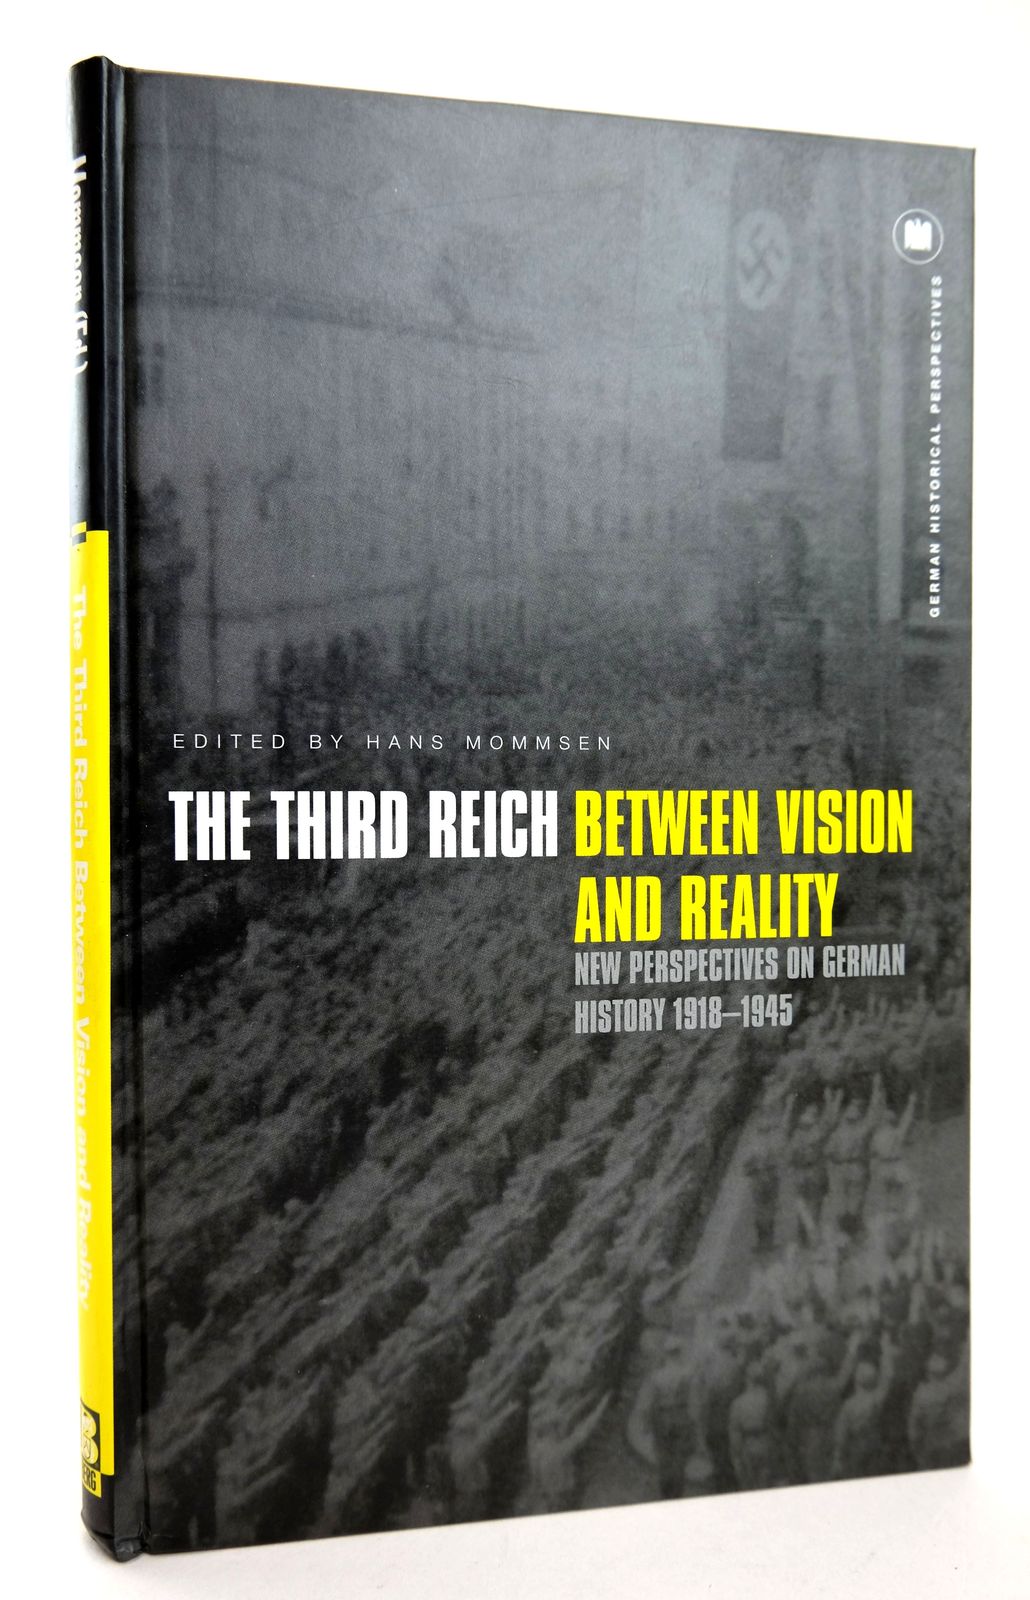 Photo of THE THIRD REICH BETWEEN VISION AND REALITY: NEW PERSPECTIVES ON GERMAN HISTORY 1918-1945 written by Mommsen, Hans published by Berg (STOCK CODE: 1818770)  for sale by Stella & Rose's Books